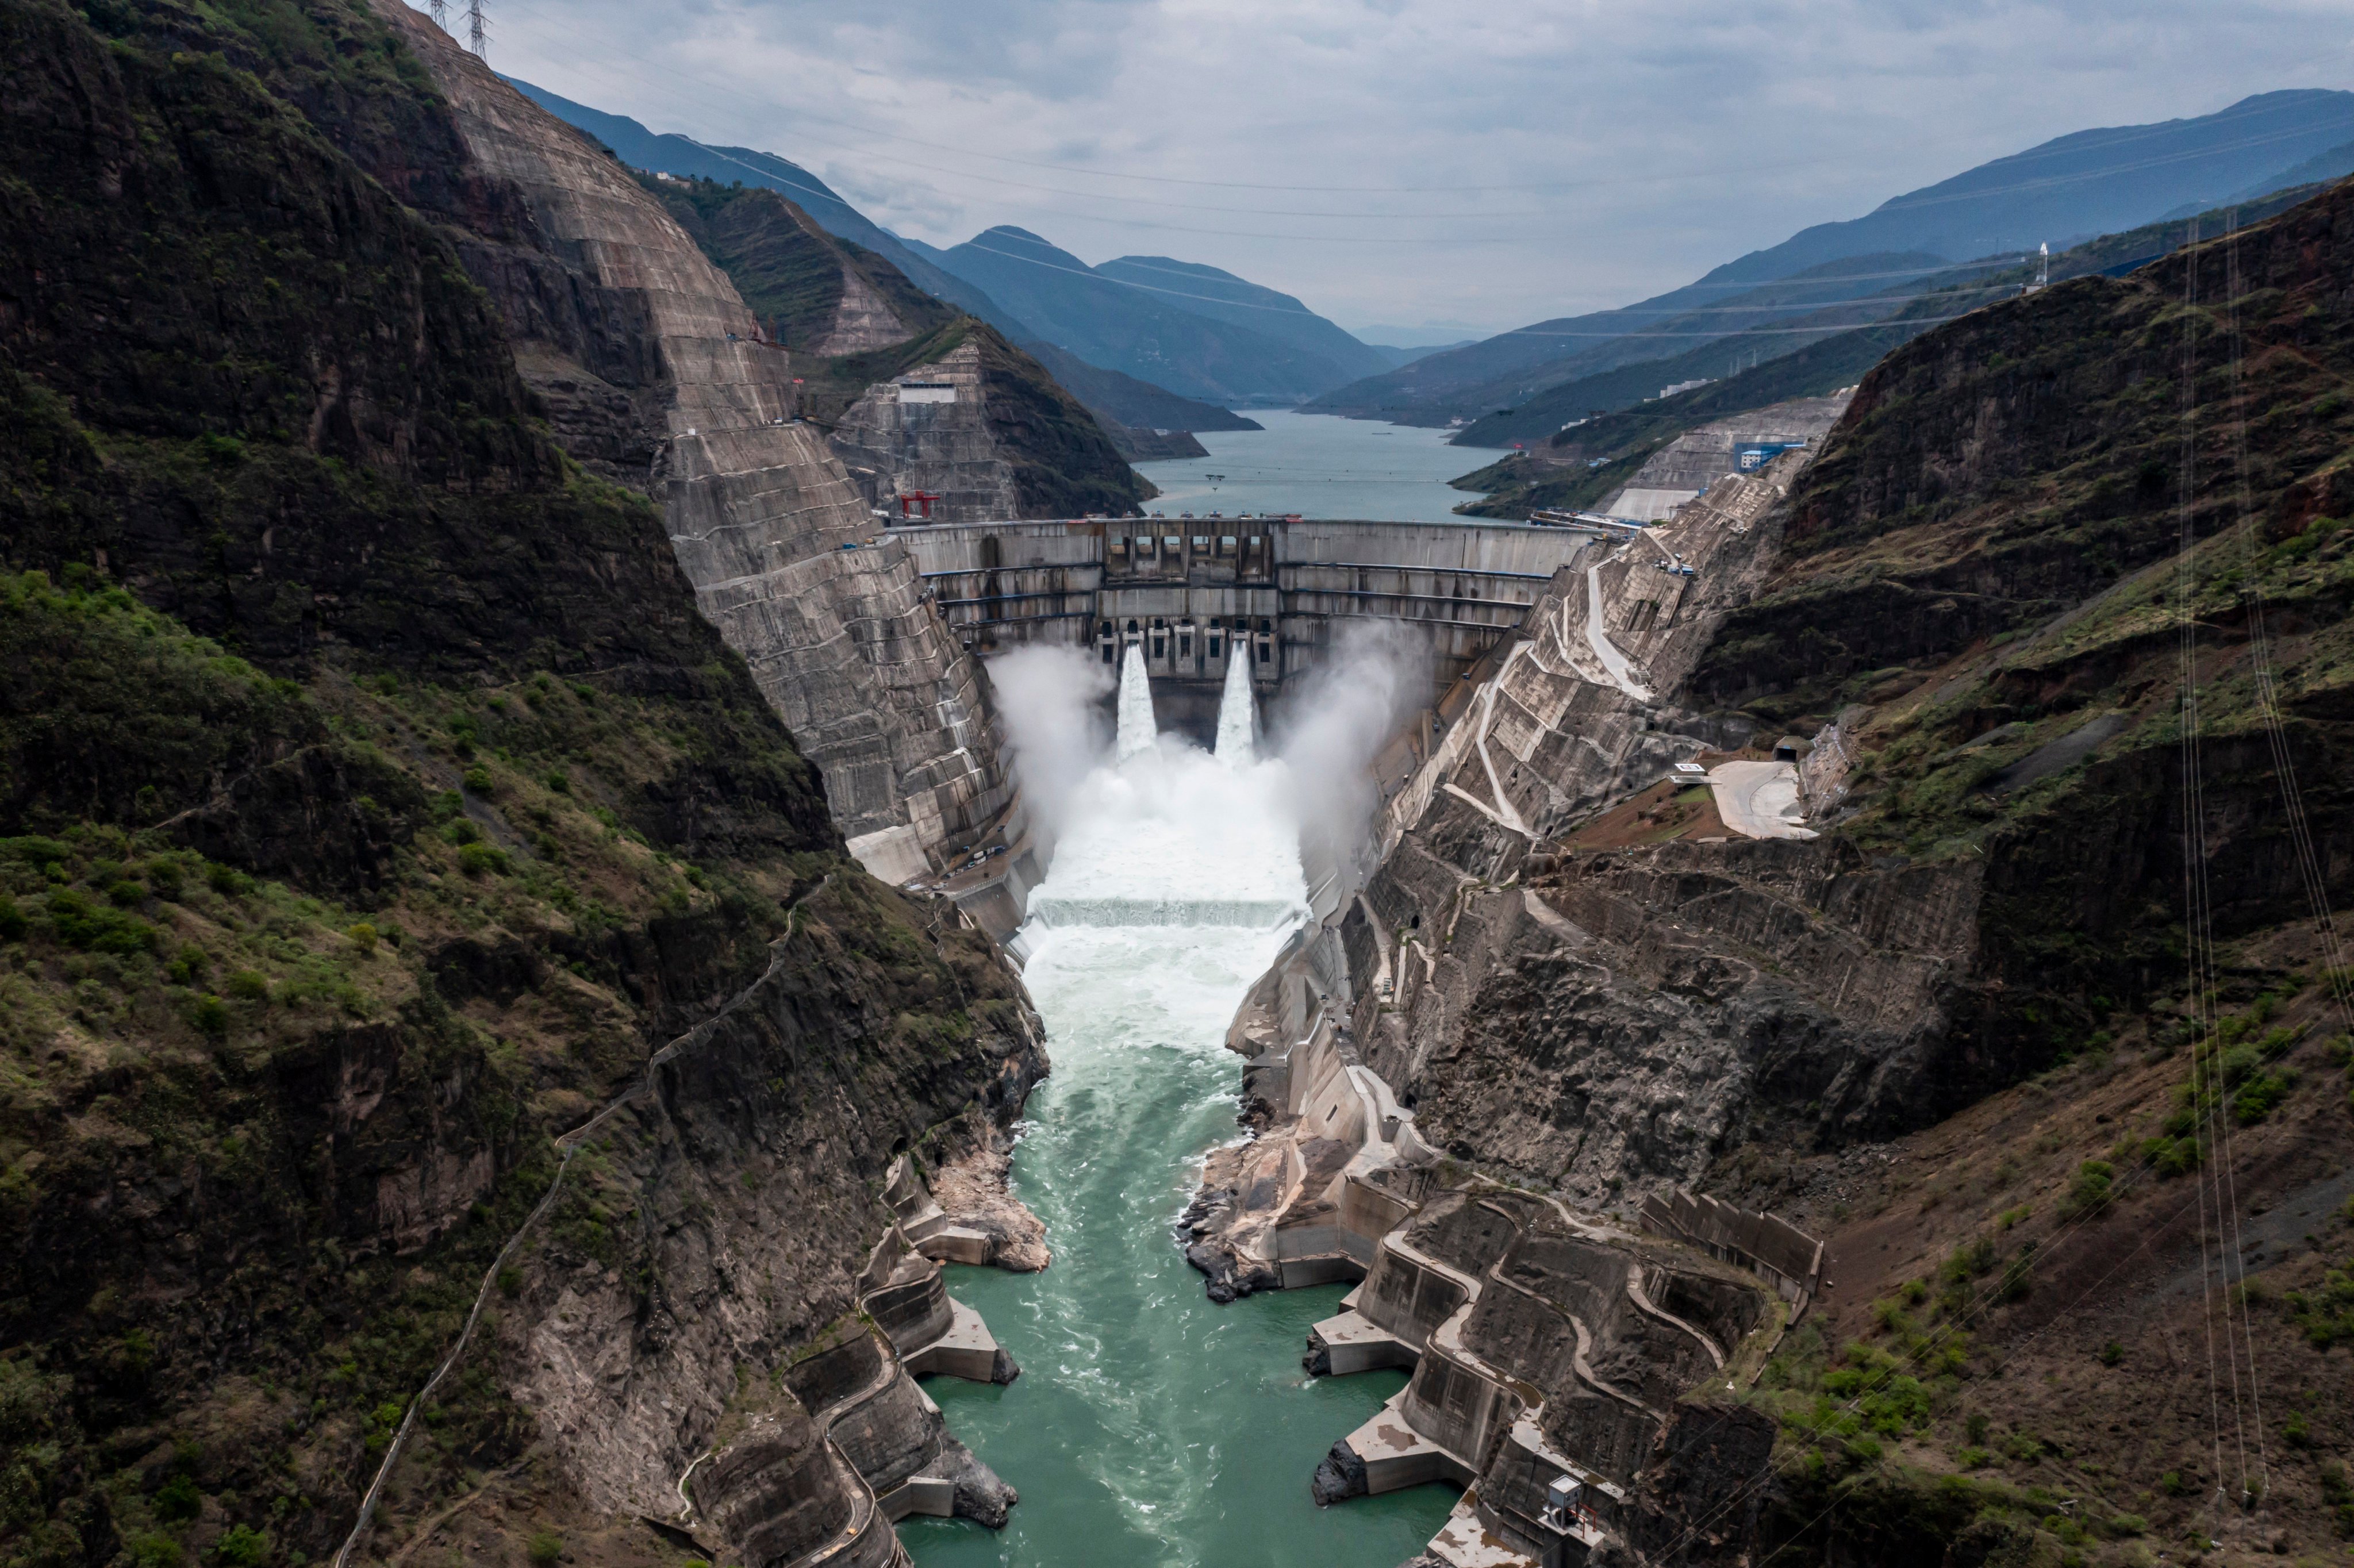 Baihetan hydropower station, which straddles the provinces of Yunnan and Sichuan in southwest China, is seen on June 28, 2021. Photo: Xinhua